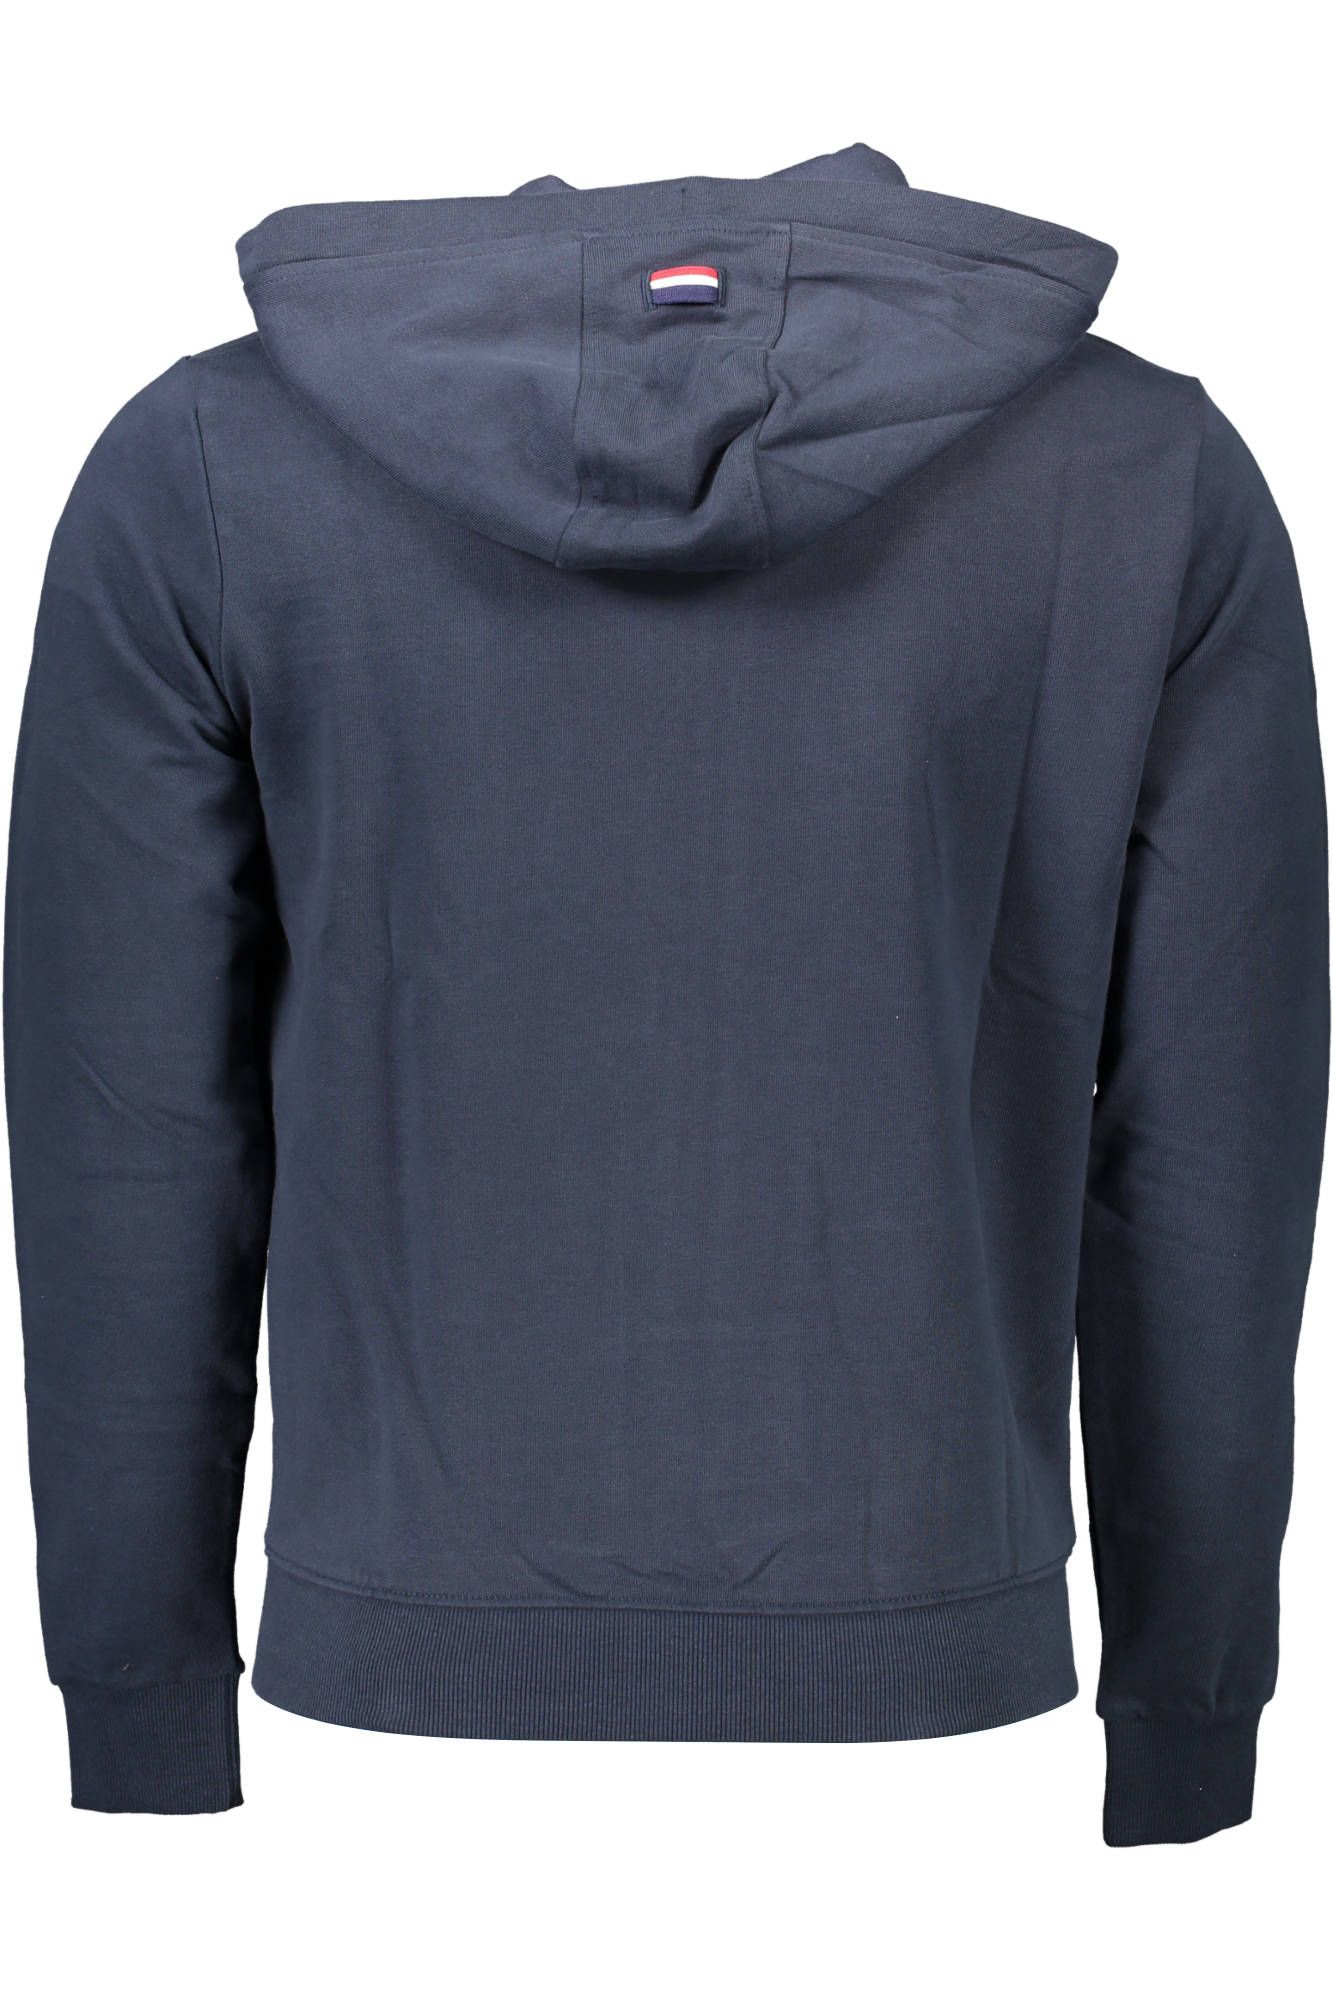 Chic Blue Hooded Sweatshirt with Embroidered Logo